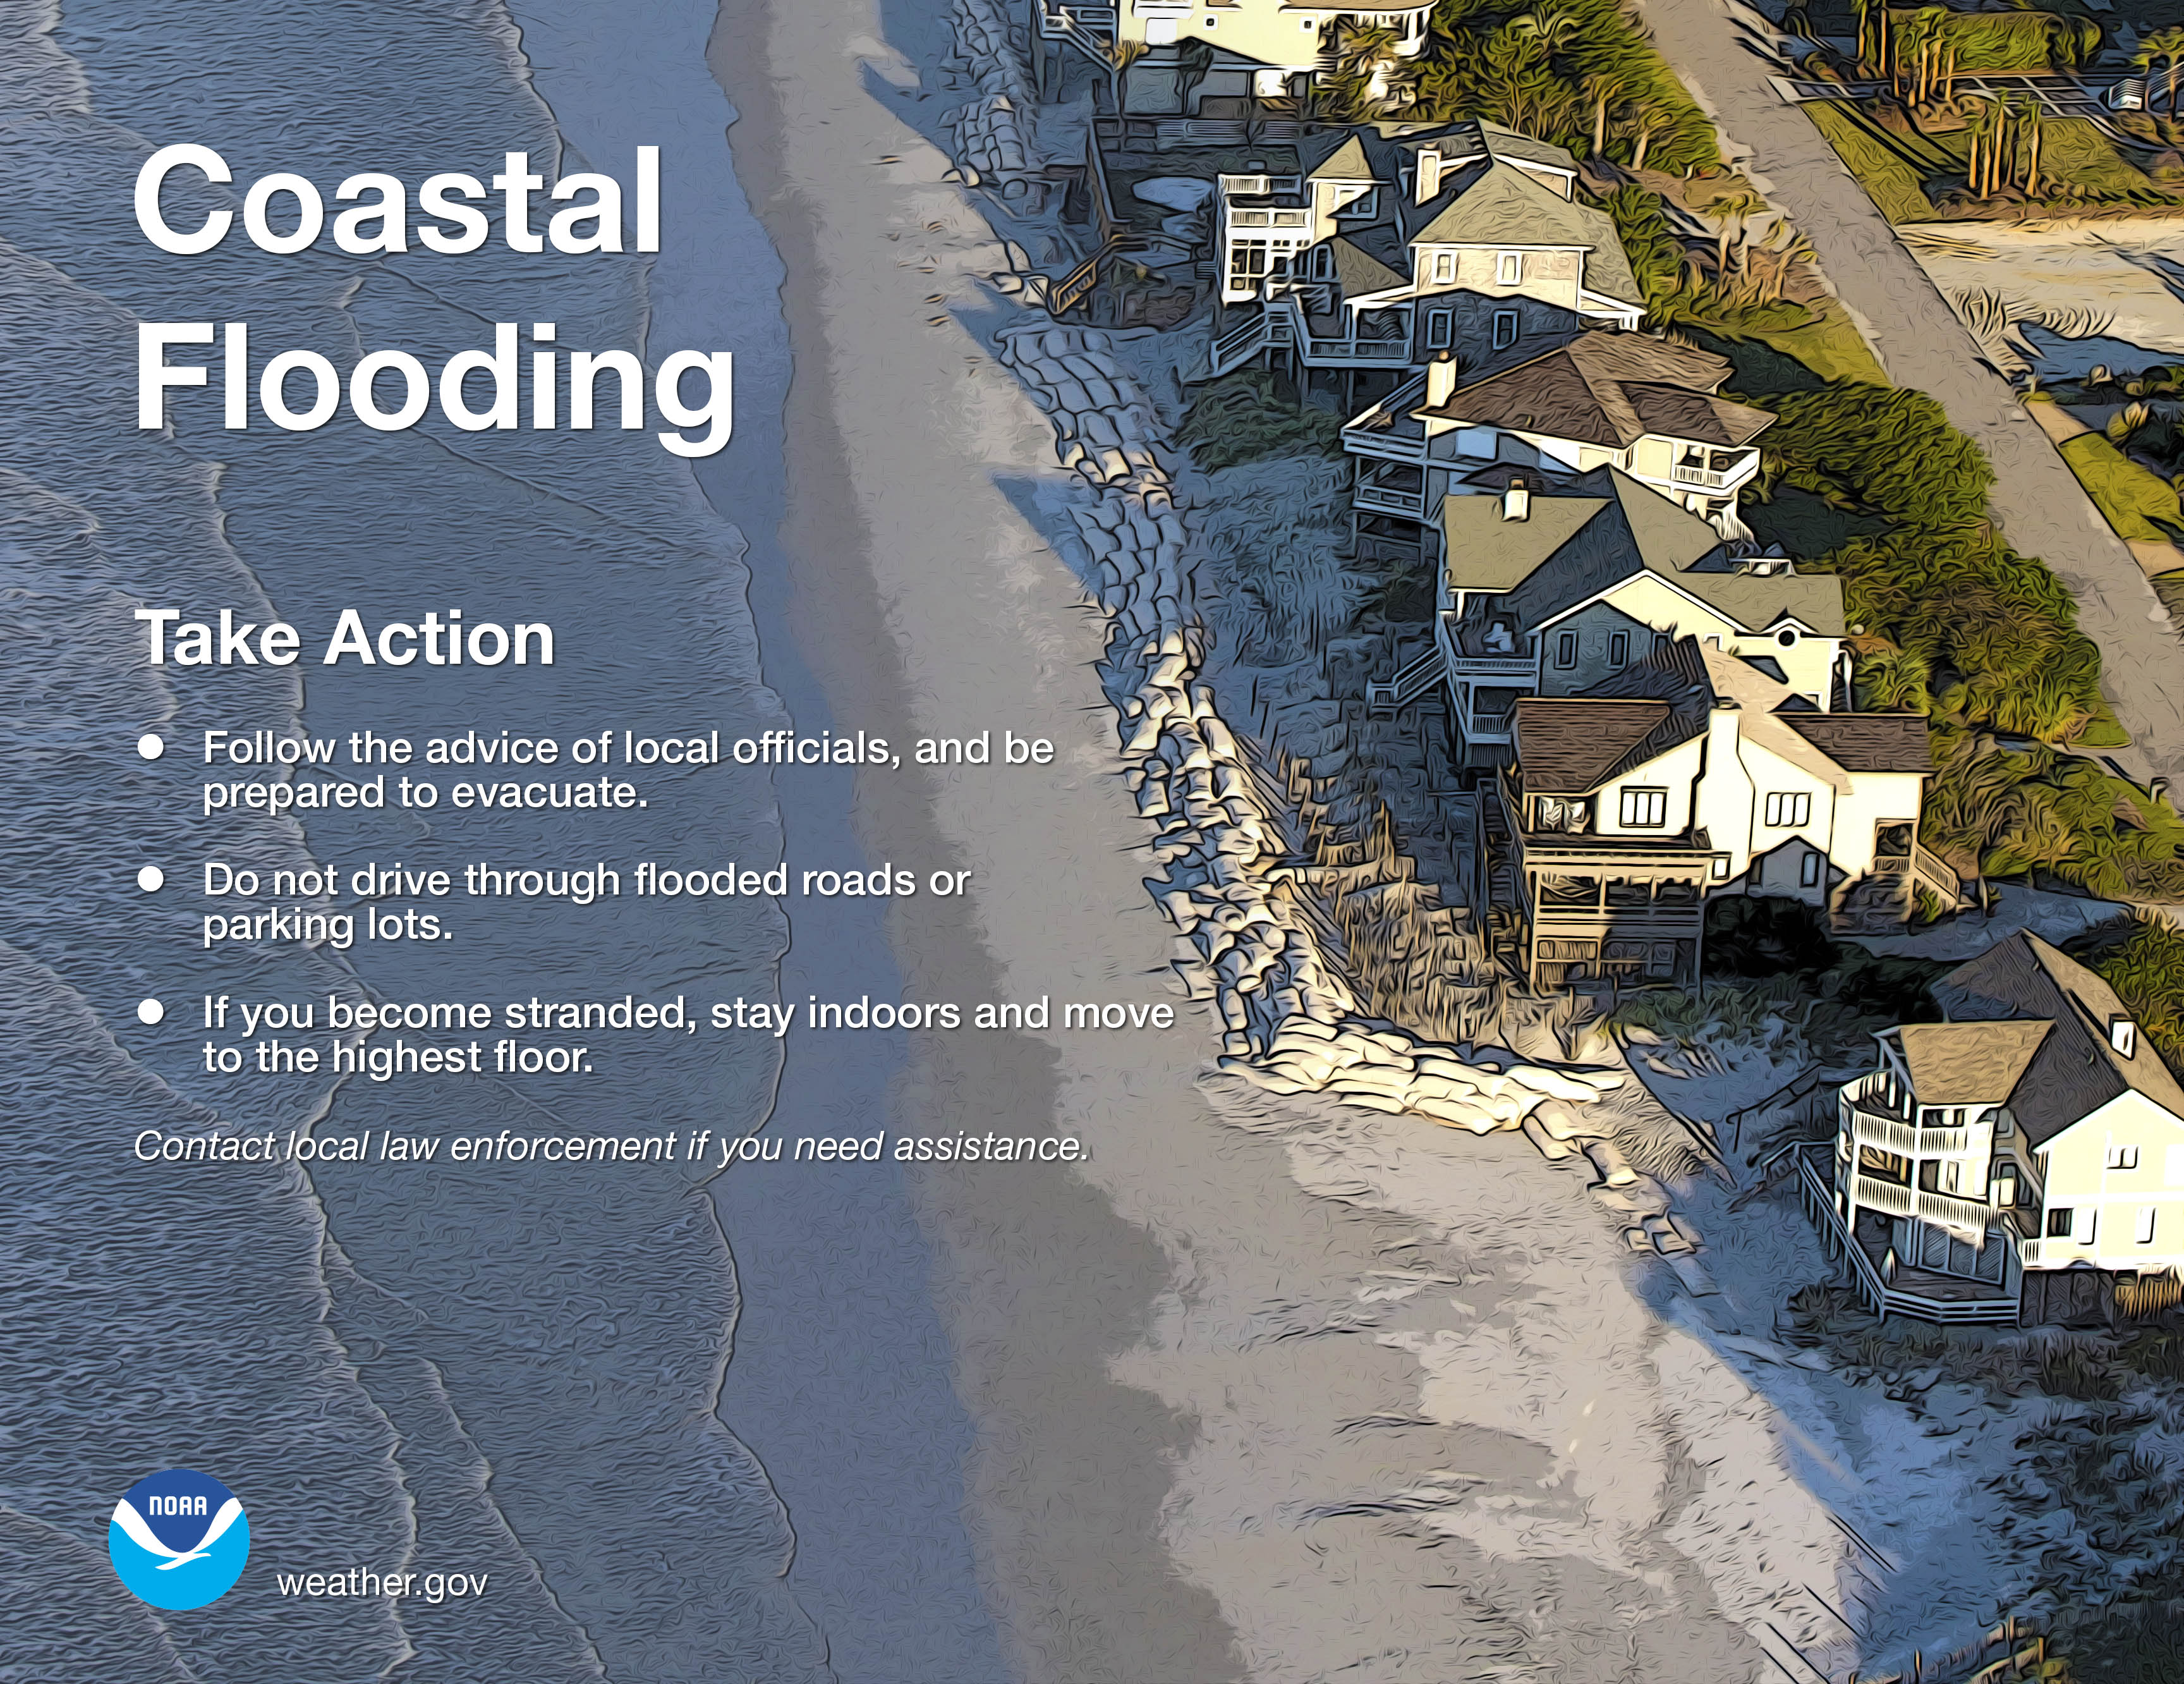 Coastal Flooding.  Take Action: 1) Follow the advice of local officials, and be prepared to evacuate. 2) Do not drive through flooded roads or parking lots. 3) If you become stranded, stay indoors and move to the highest floor. Contact local law enforcement if you need assistance.